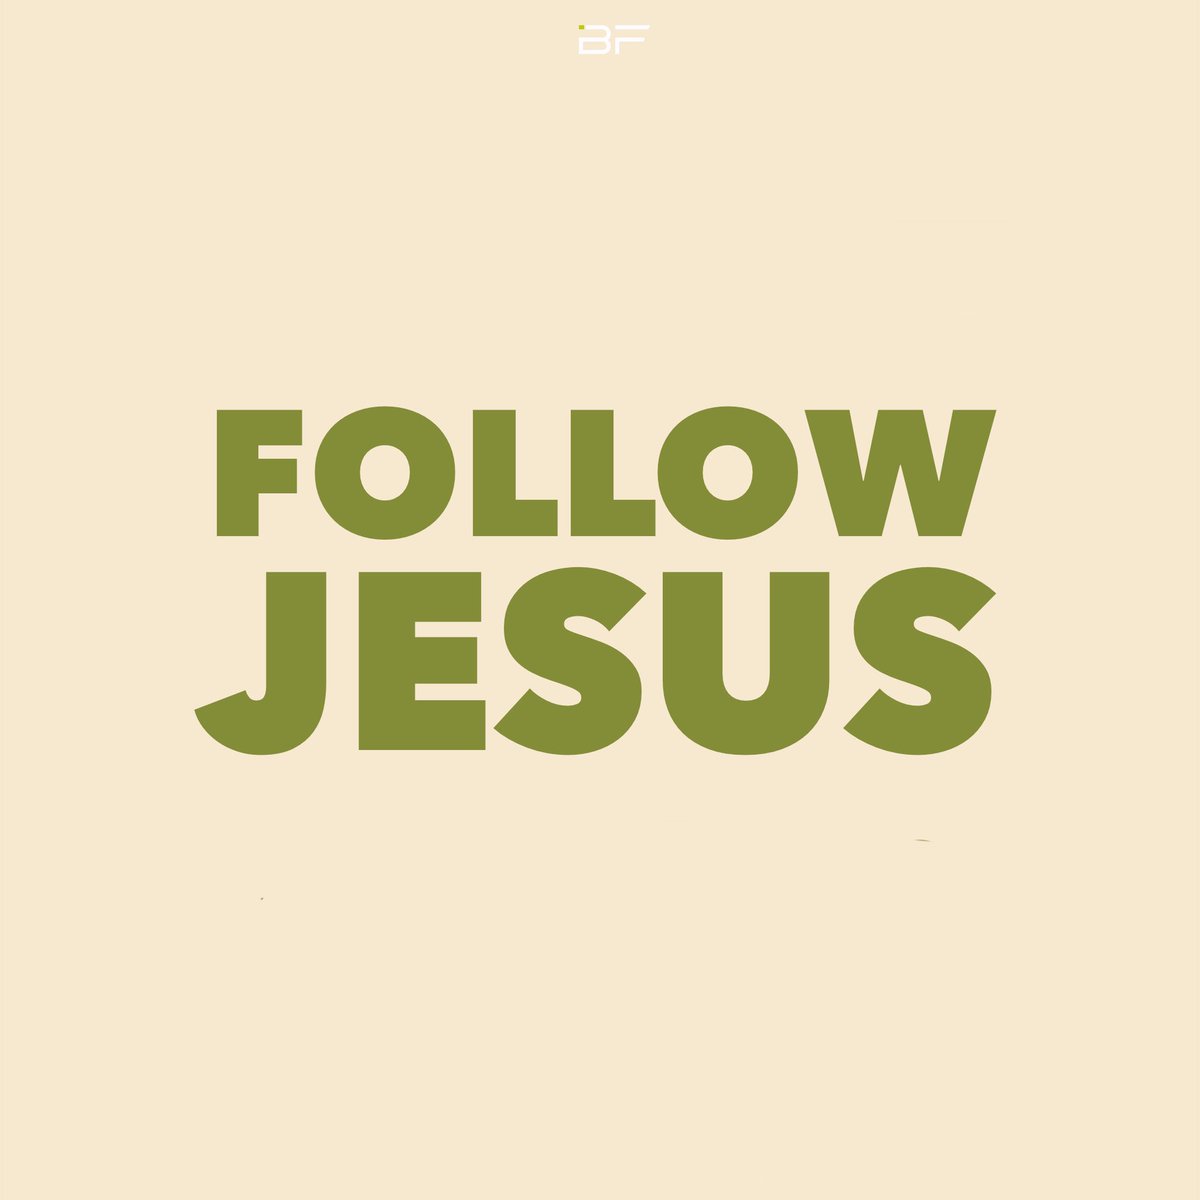 3 Requirements of a Disciple:

1. Deny Yourself
2. Take Up Your Cross
3. Follow Jesus

🚫✝️➡️

#Disciple #Discipleship #Deny #PickUp #FollowJesus #Follow #Following #Jesus